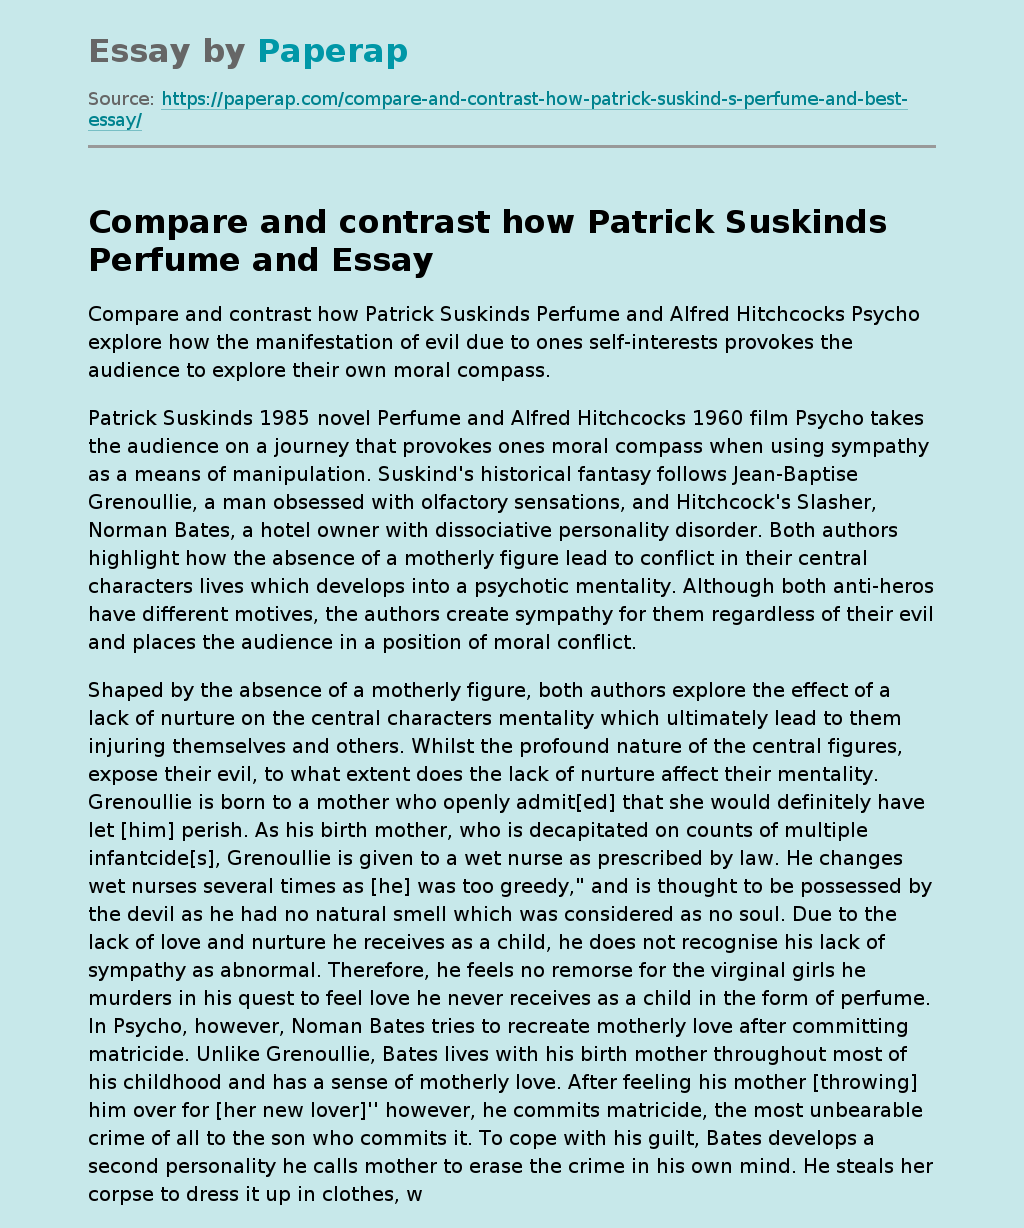 Compare and contrast how Patrick Suskinds Perfume and